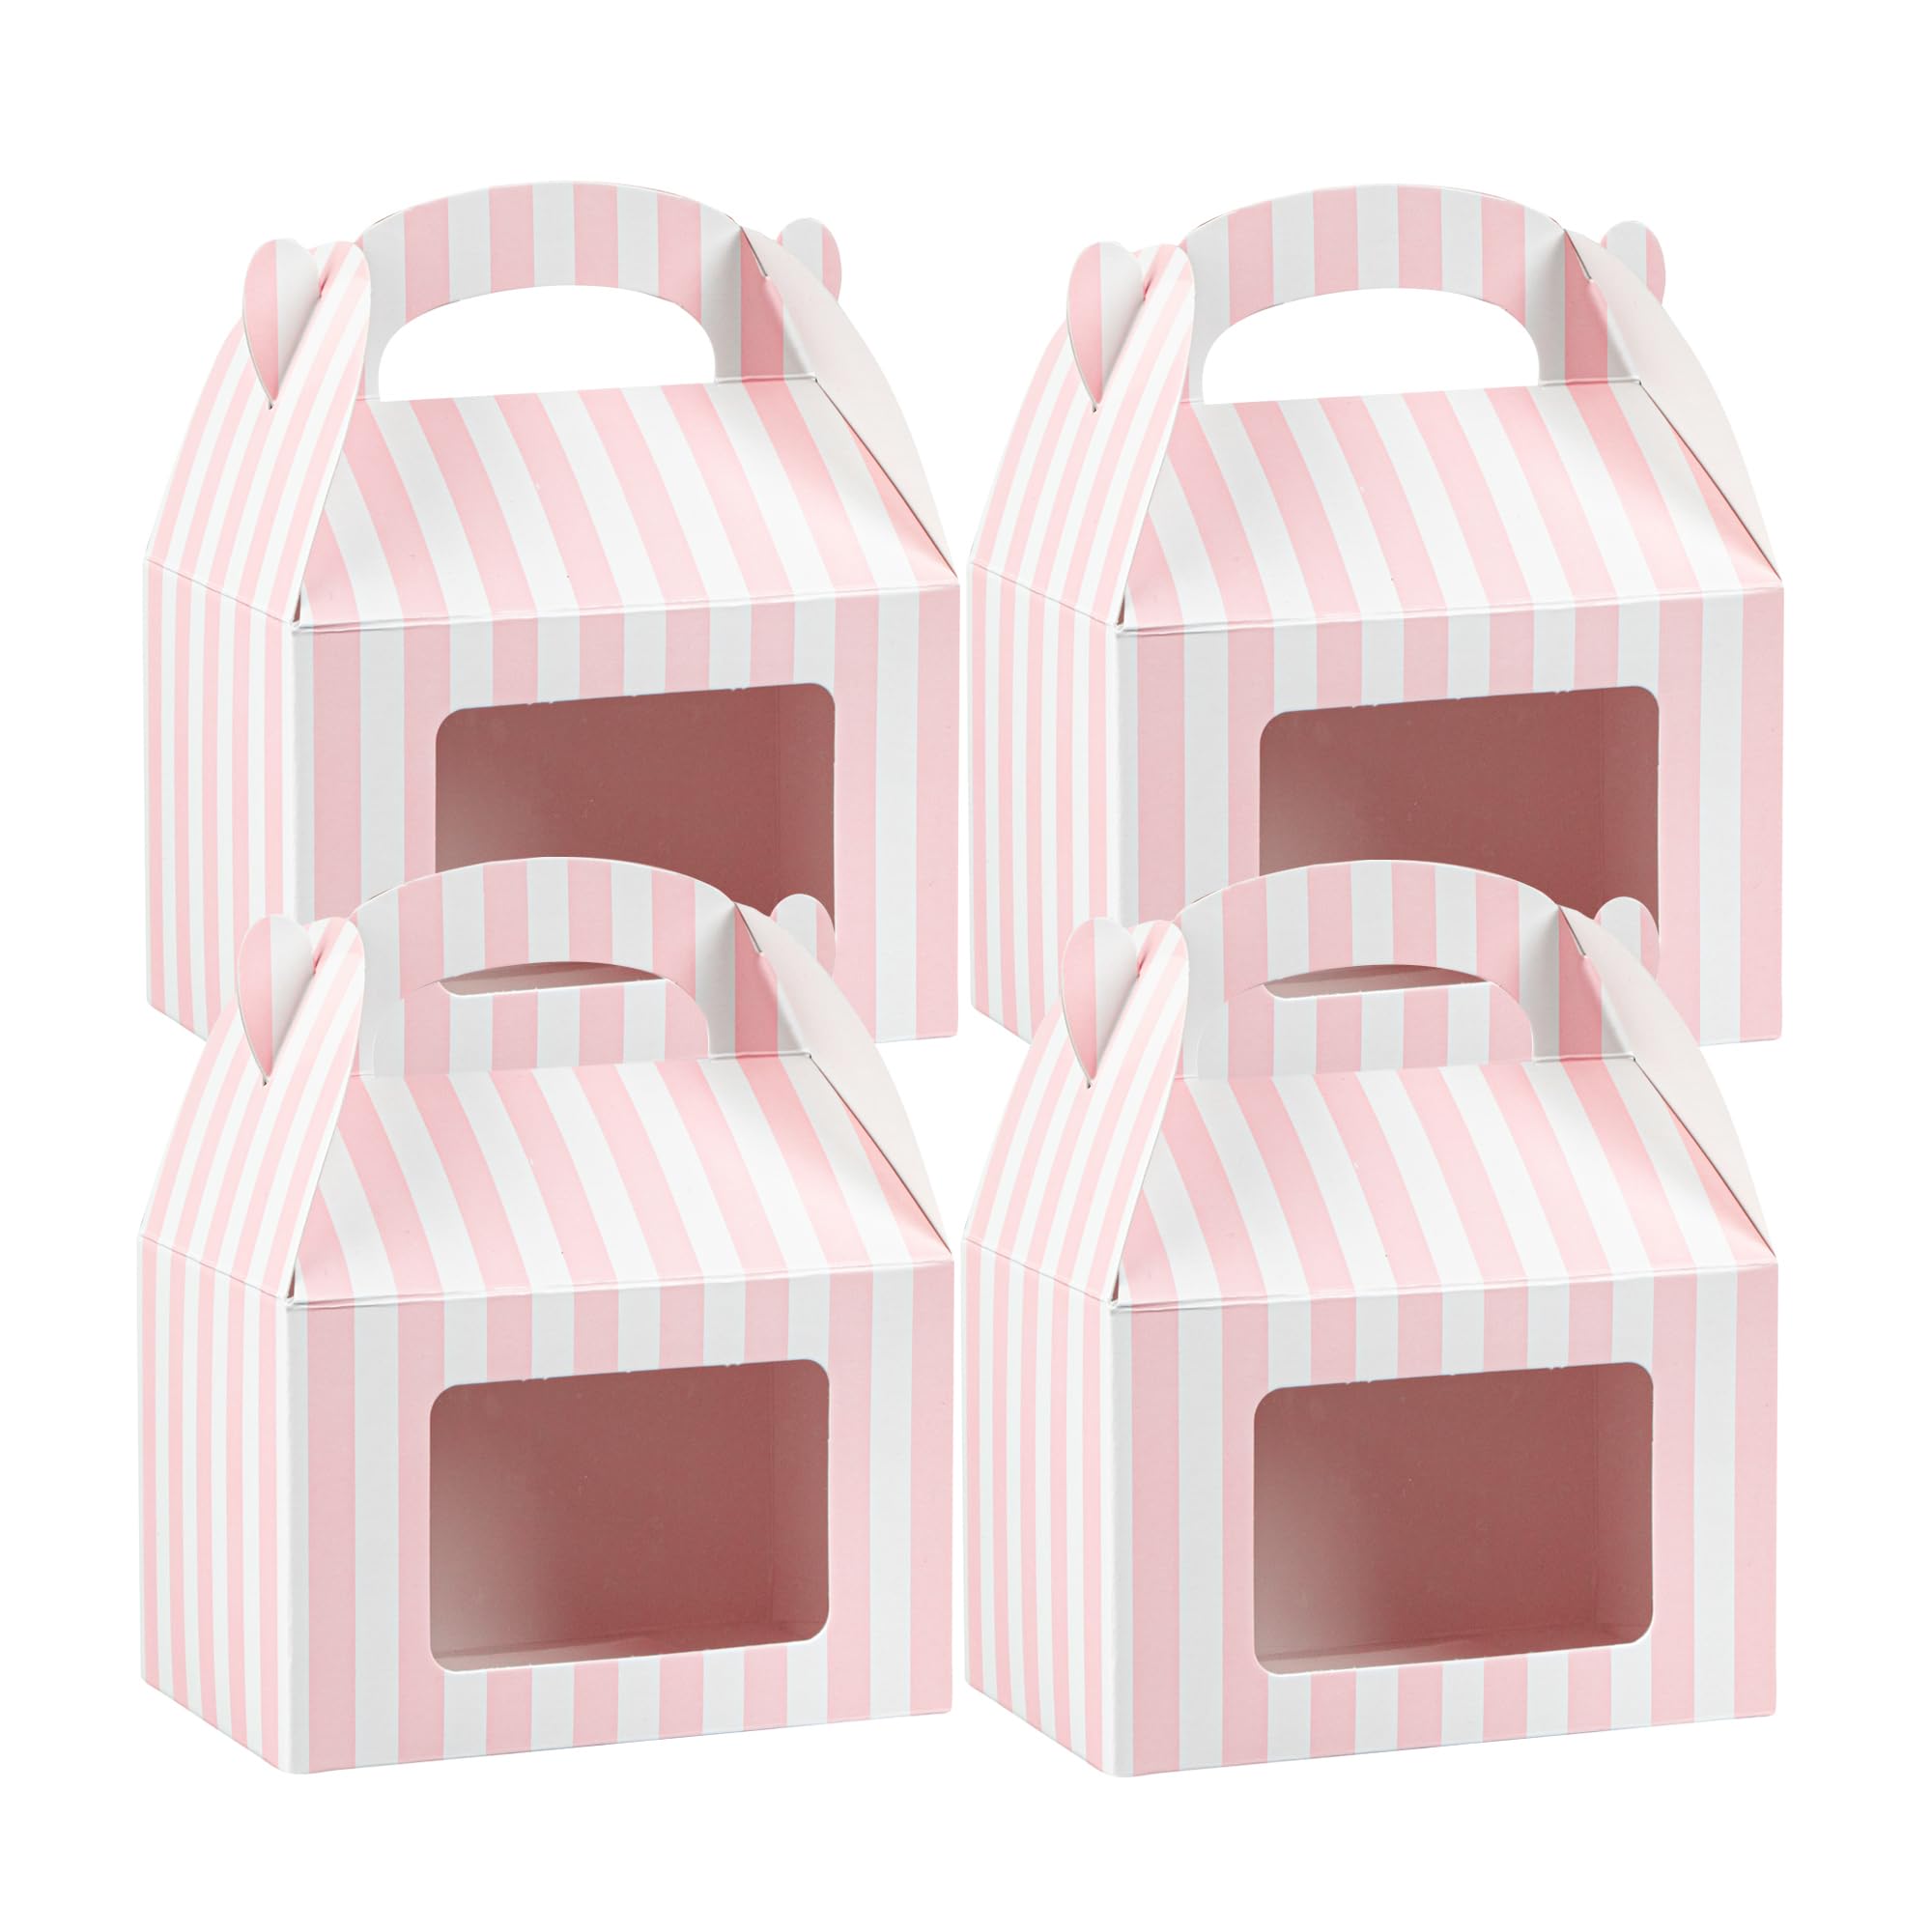 Bio Tek 6 x 3.5 x 6.5 Inch Gable Boxes For Party Favors, 25 Durable Gift Treat Boxes - Striped Pattern, Pink And White Paper Barn Boxes, Clear PET Window, With Built-In Handle - Restaurantware